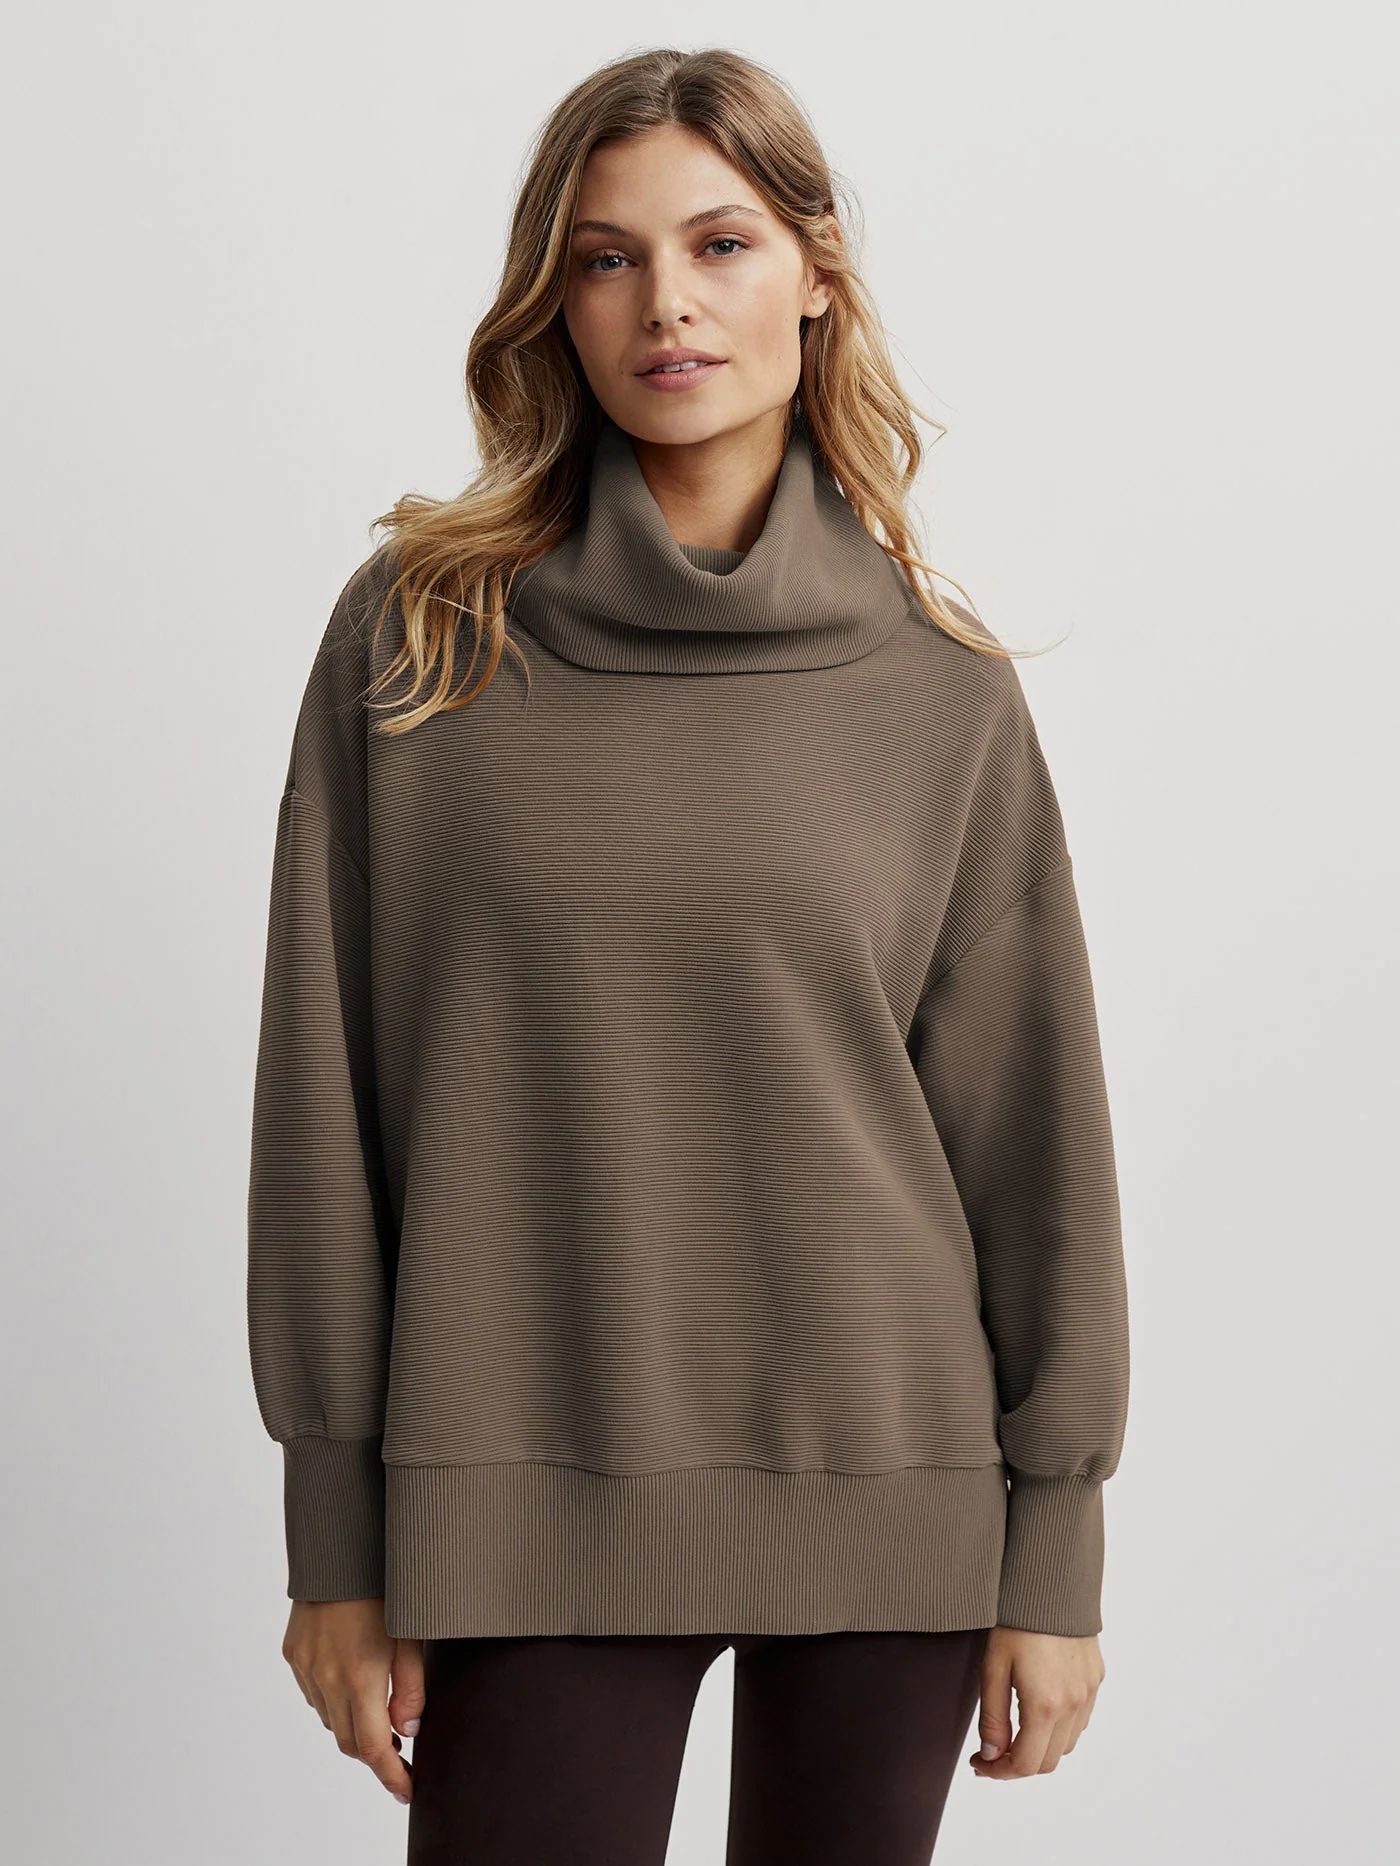 Milton Sweat43 ReviewsThe Milton is a beautifully oversized sweat, crafted in our bestselling Ott... | Varley USA